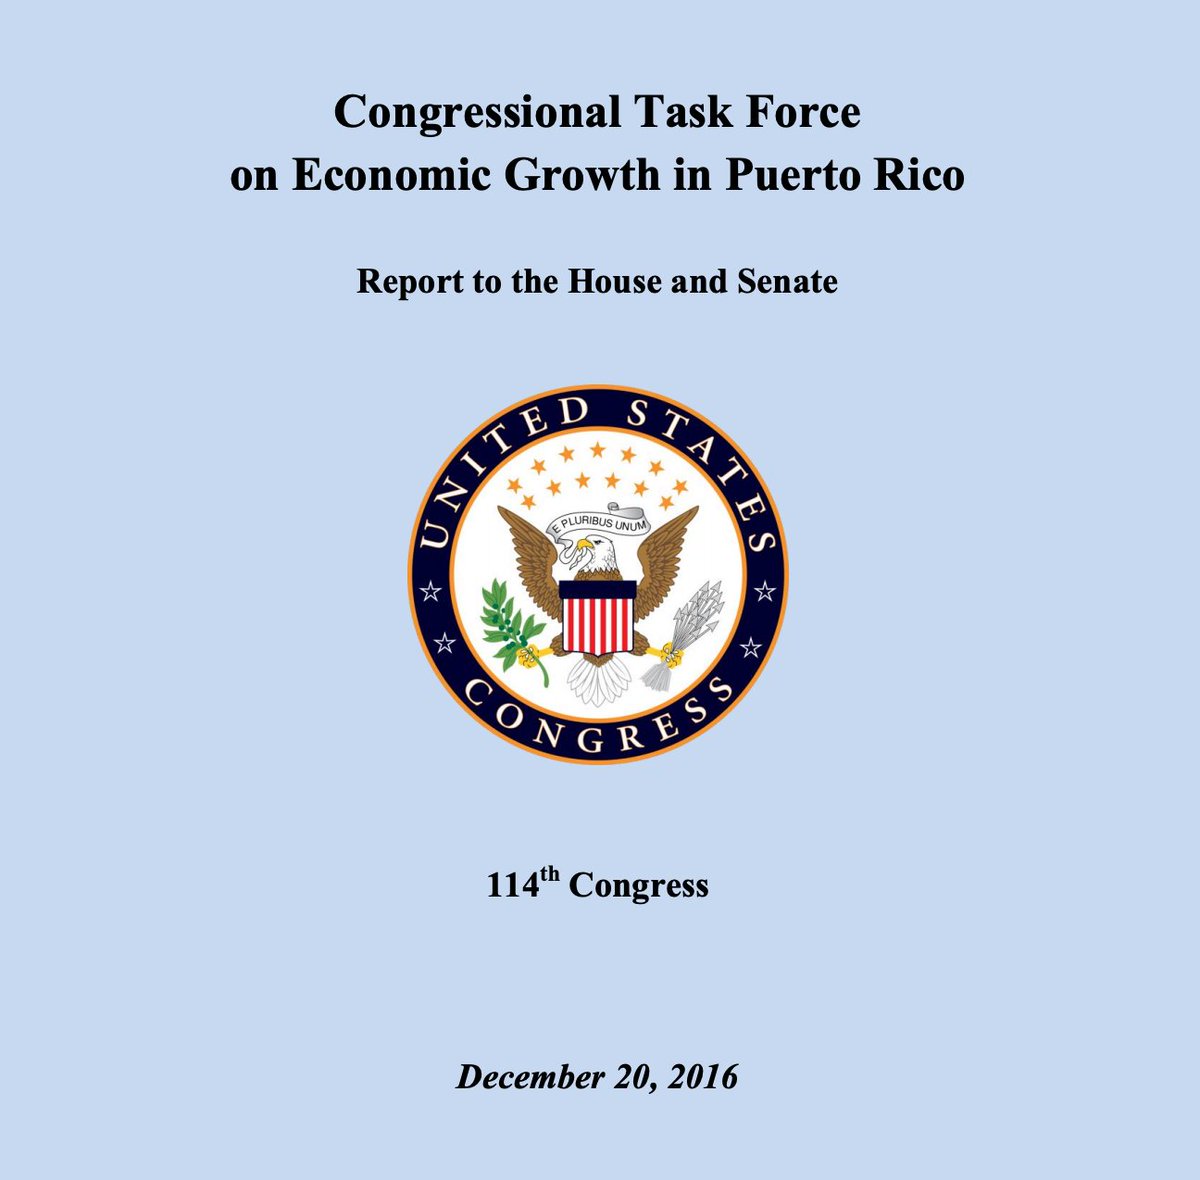 I am frustrated that the recommendations made by the Congressional Task Force on Economic Growth in Puerto Rico-a task force mandated by PROMESA and to which Mr. Duffy belonged-were ignored by a GOP Congress for 2 yrs and by a GOP Senate for the remainder.  https://www.finance.senate.gov/imo/media/doc/Bipartisan%20Congressional%20Task%20Force%20on%20Economic%20Growth%20in%20Puerto%20Rico%20Releases%20Final%20Report.pdf